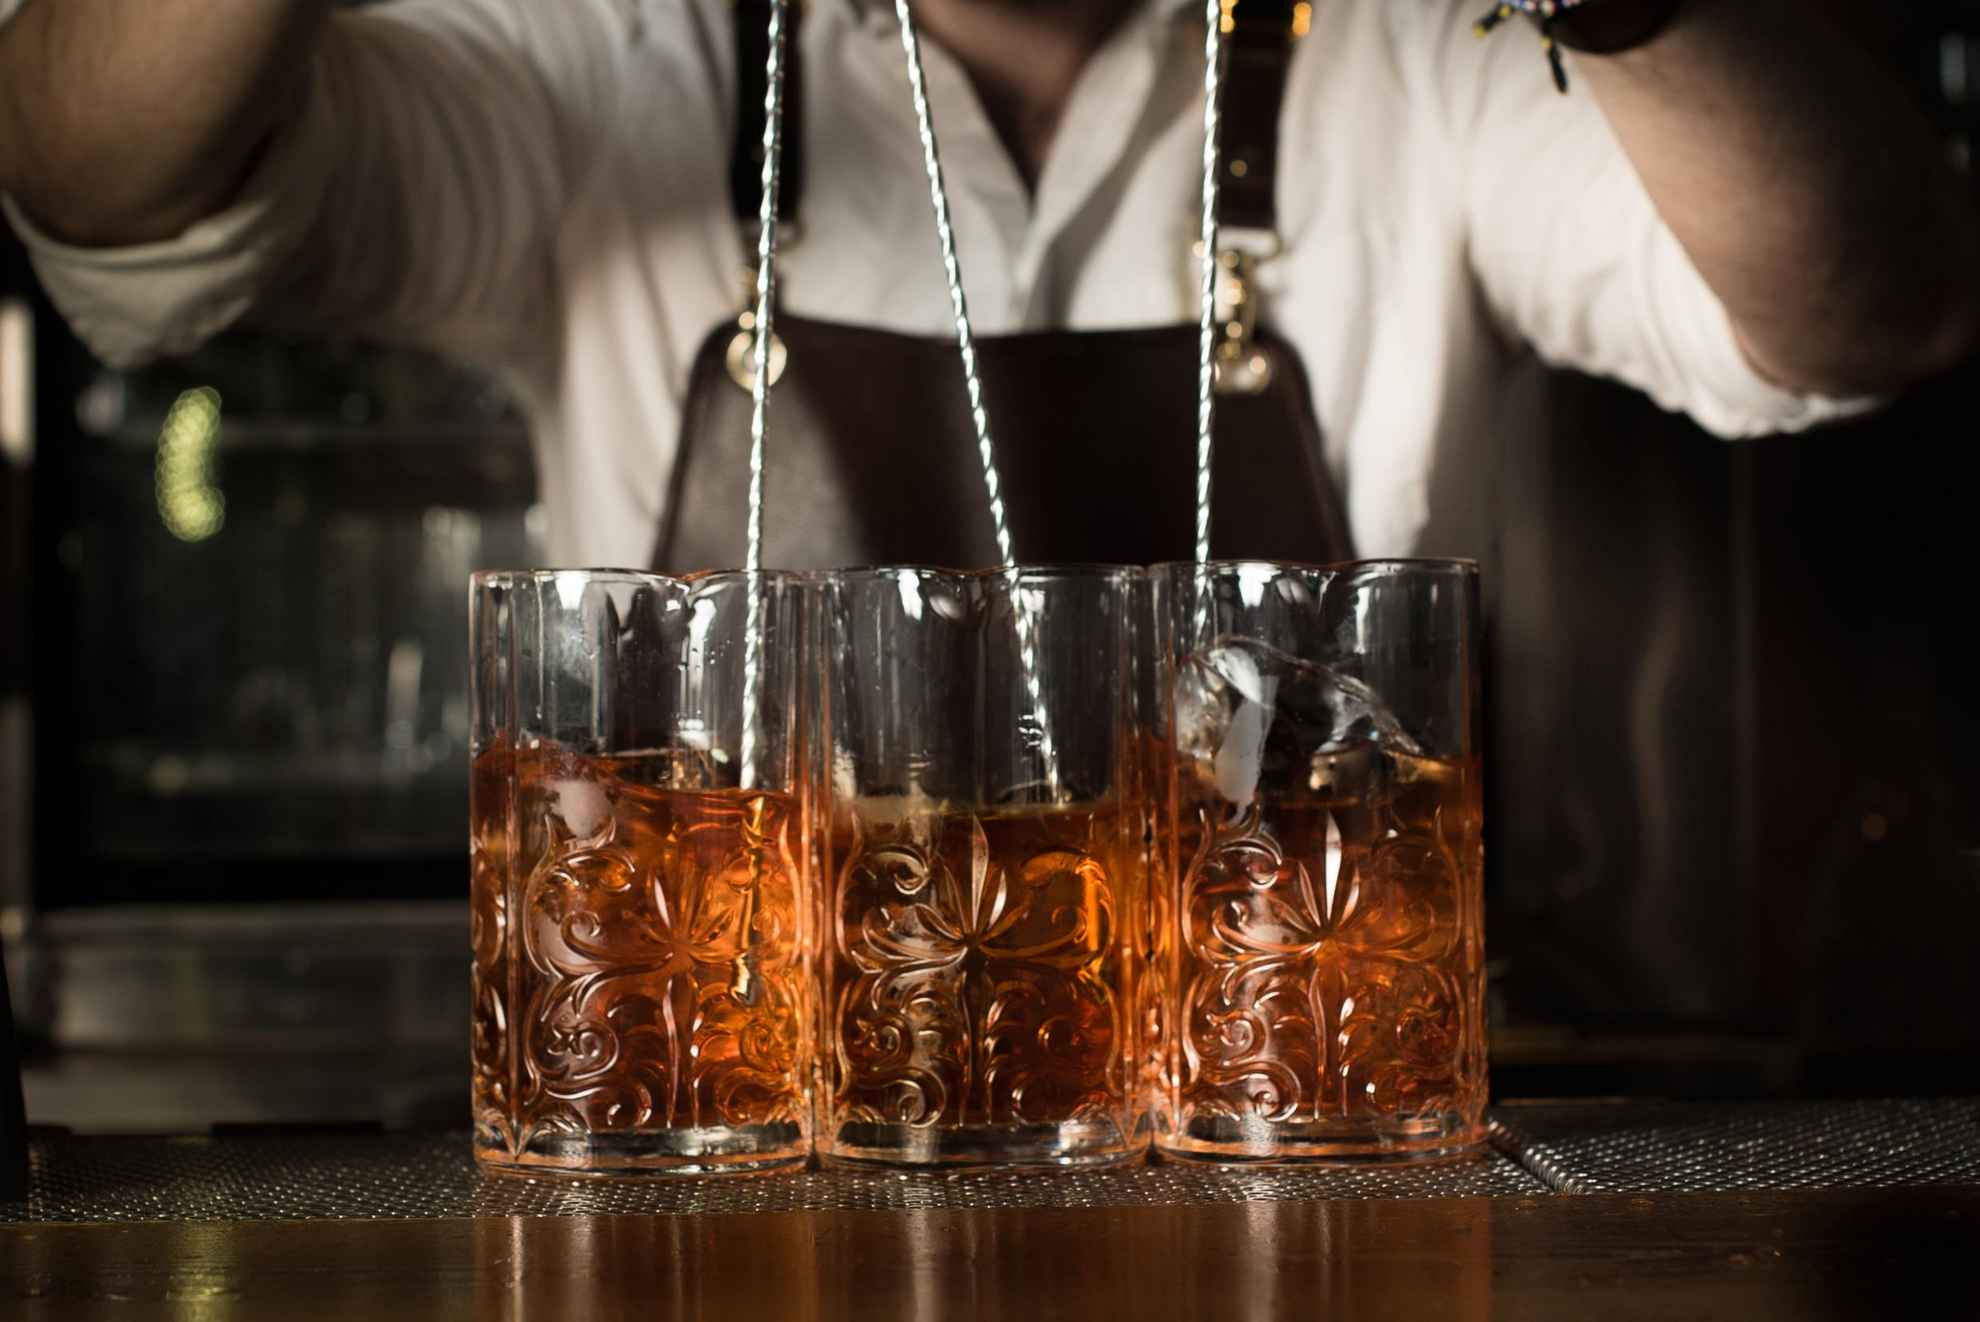 A close-up of three drinks being stirred by a bartender.